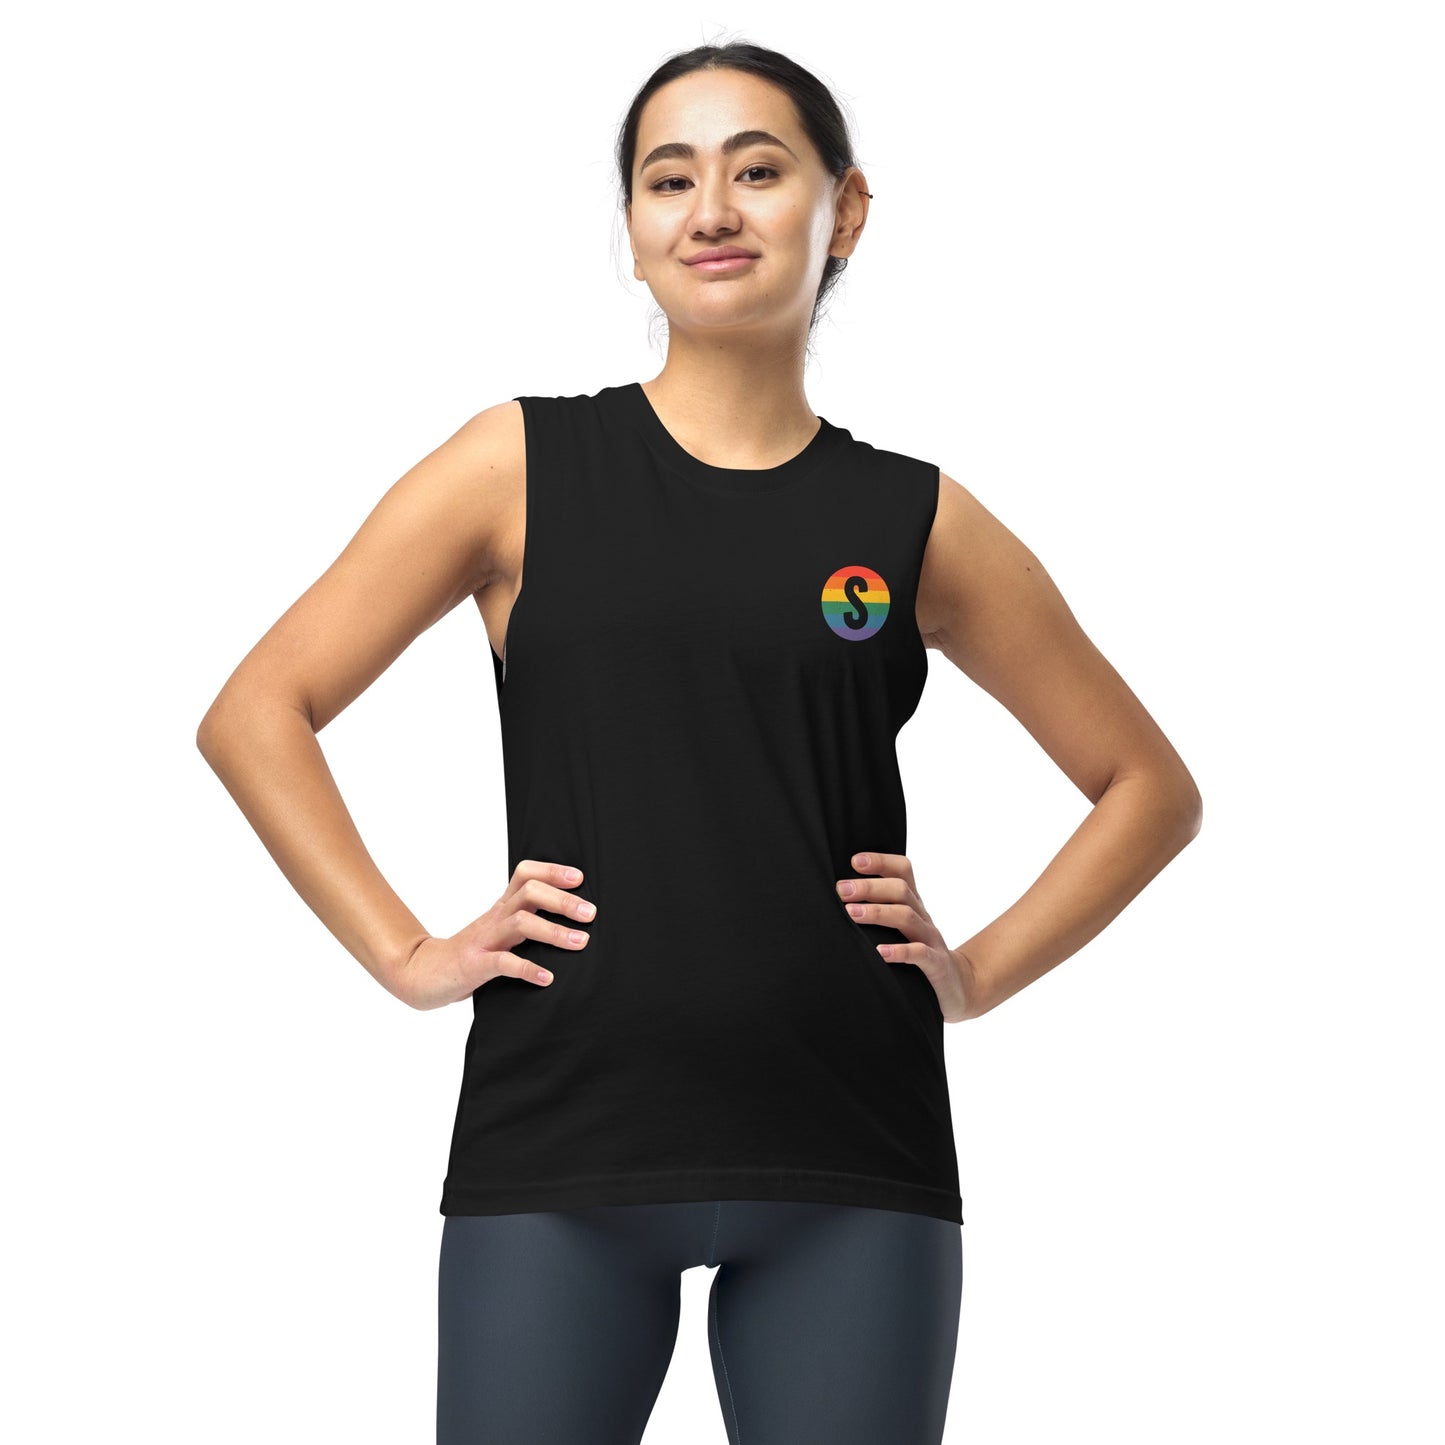 SmartLess Rainbow Faces Unisex Muscle Tank Top